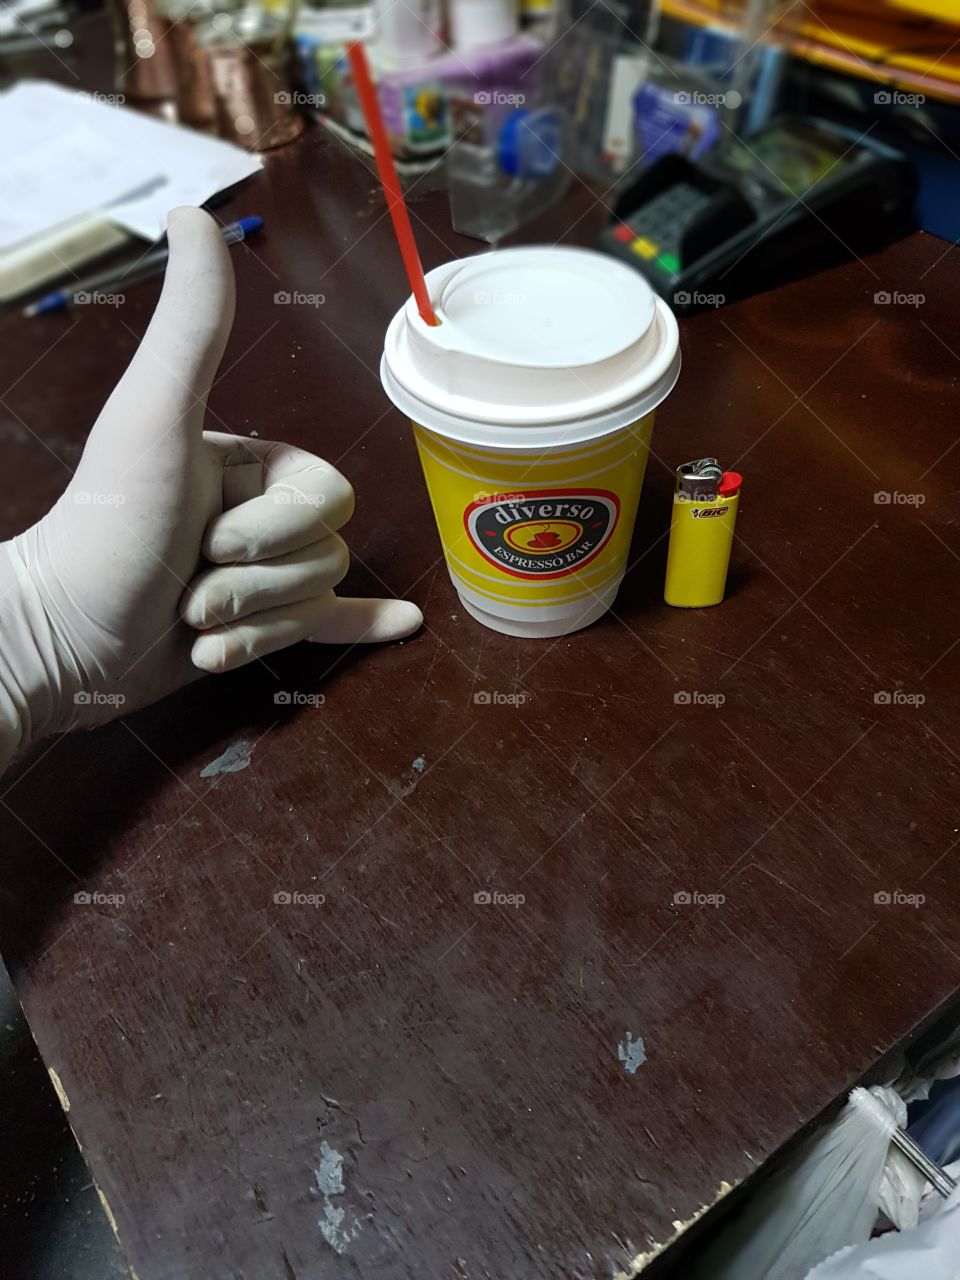 Drinking coffe at work